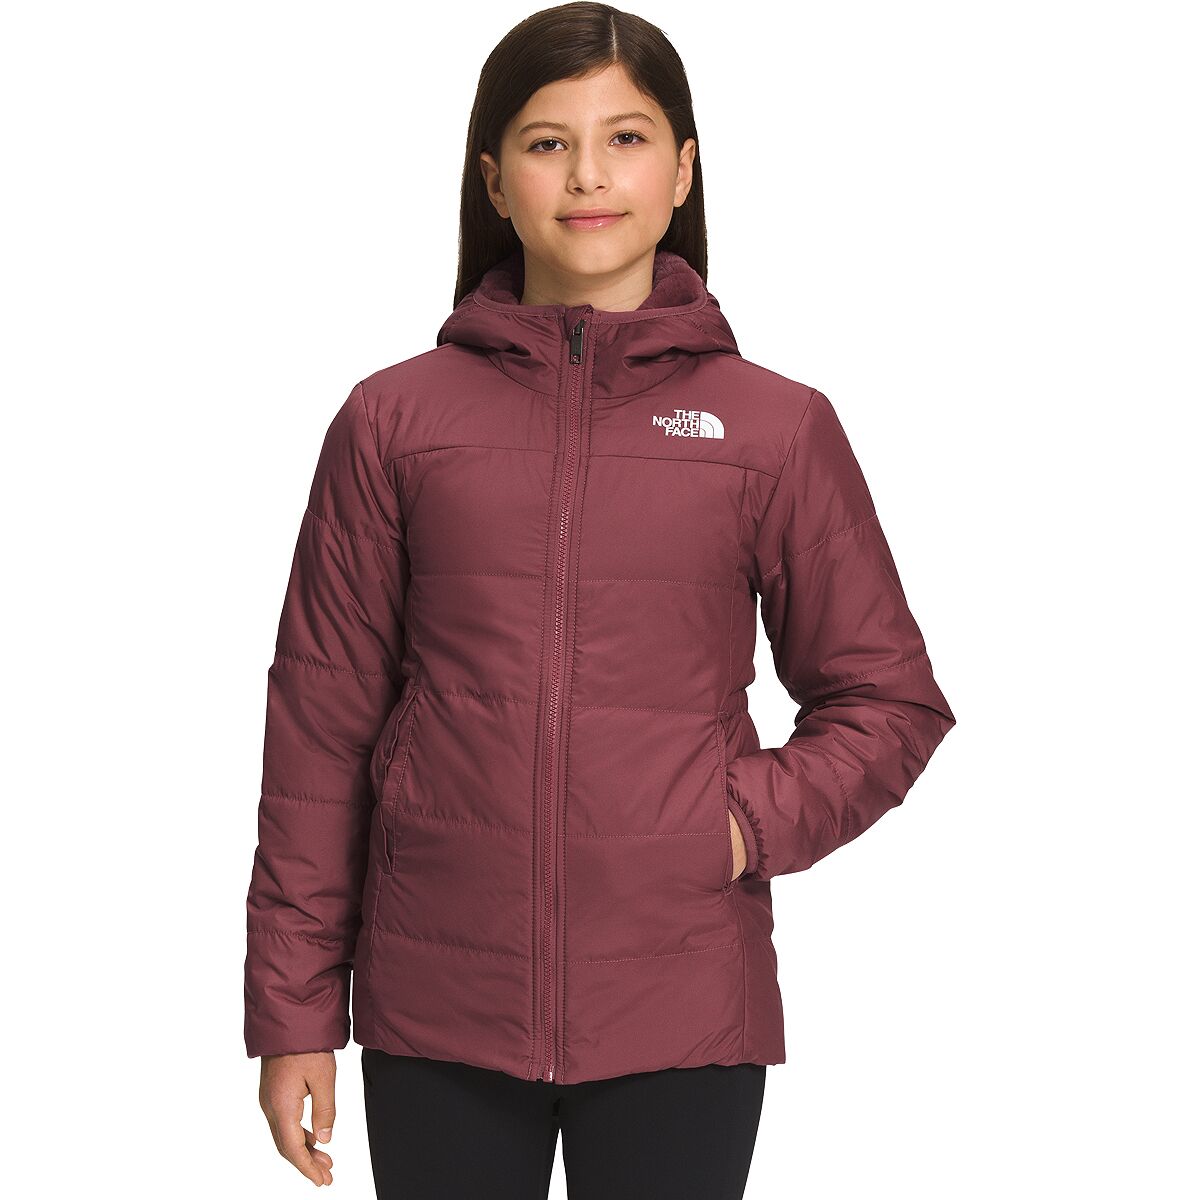 The North Face Mossbud Reversible Parka - Girls'